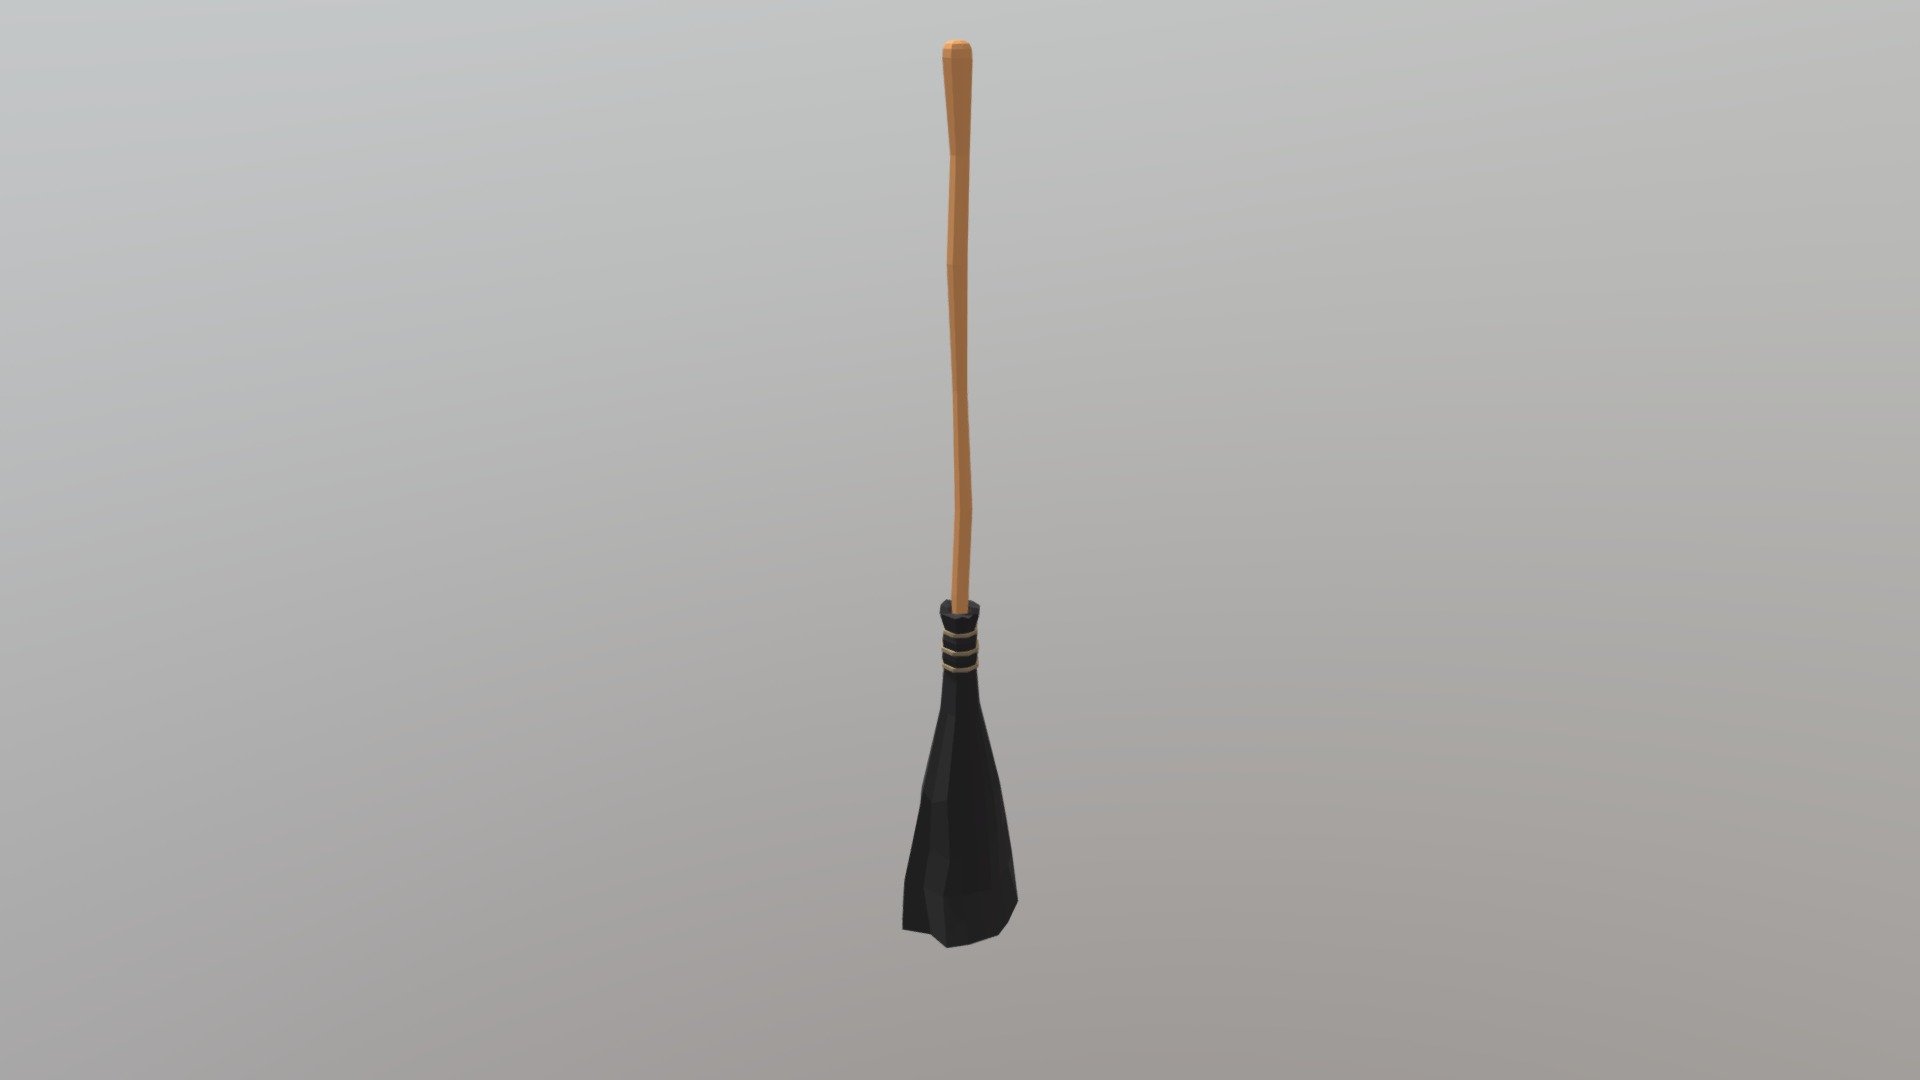 Broom cartoon low poly.
Broom for your game.
Tool for cleaning garbage, sweep, leaves and more. in your projects 3d model